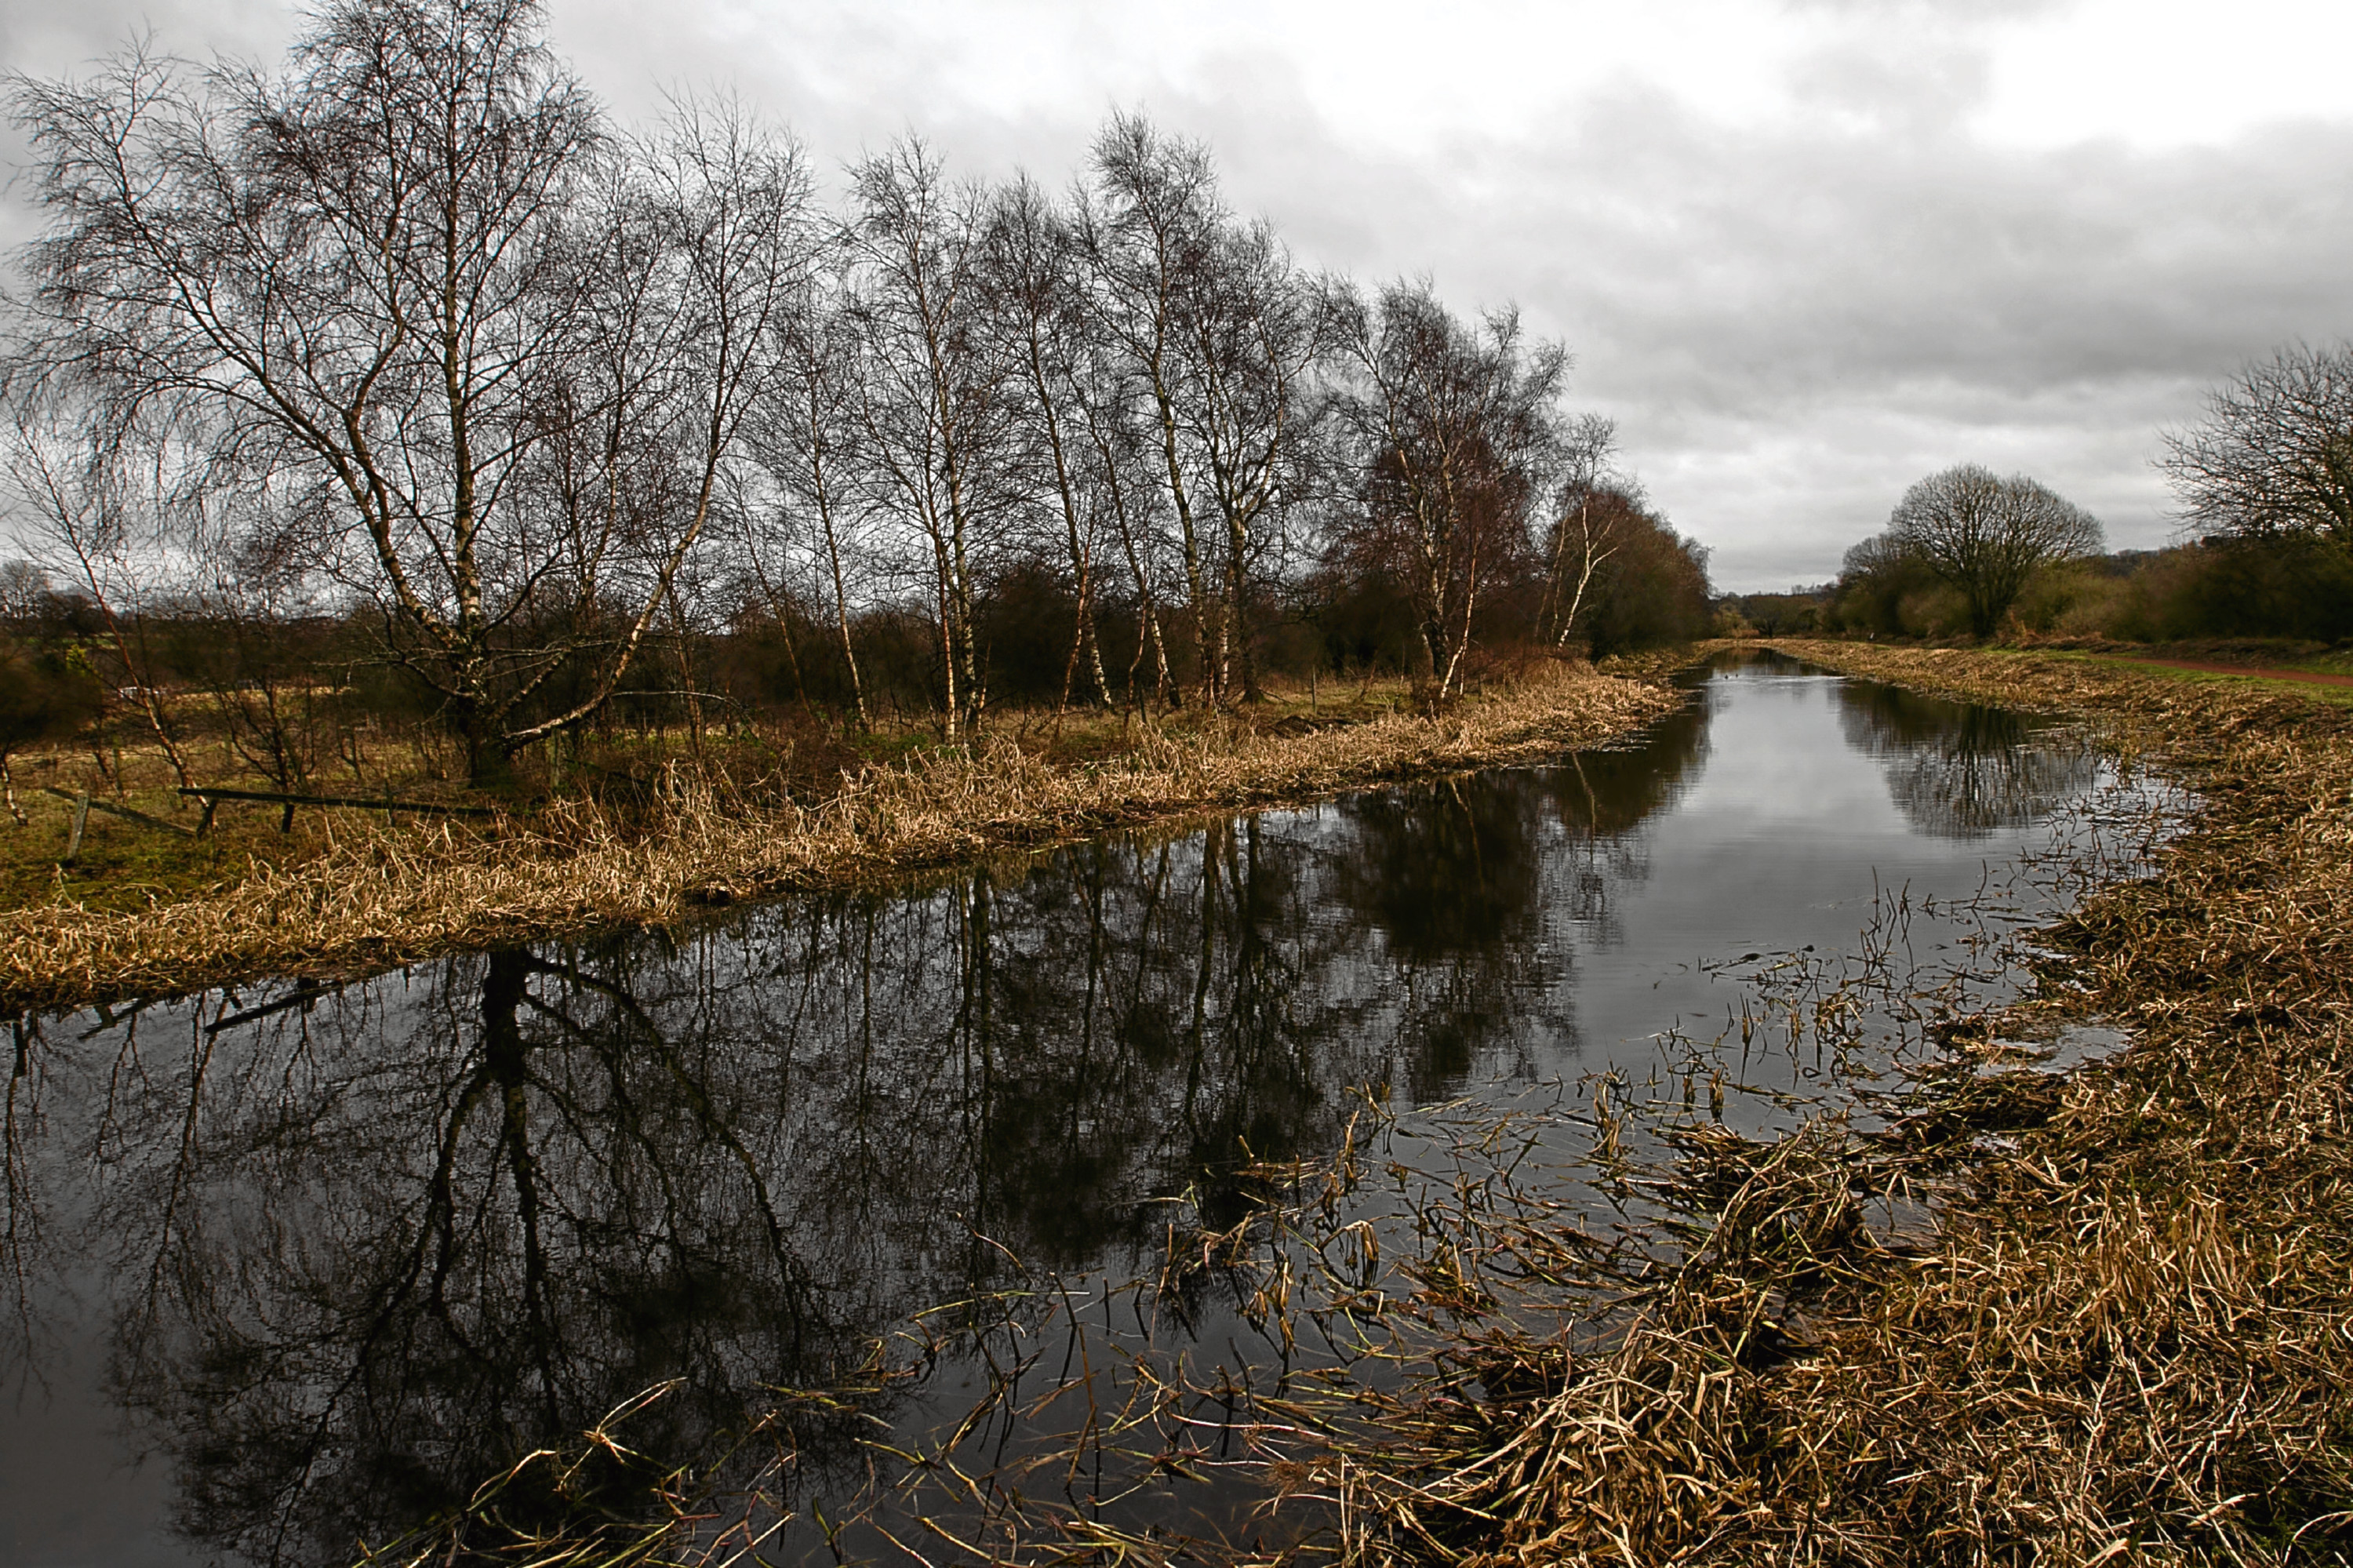 Monklands Canal, where it is believed that missing Moira Anderson's body may have been disposed of. (Andrew Cawley)